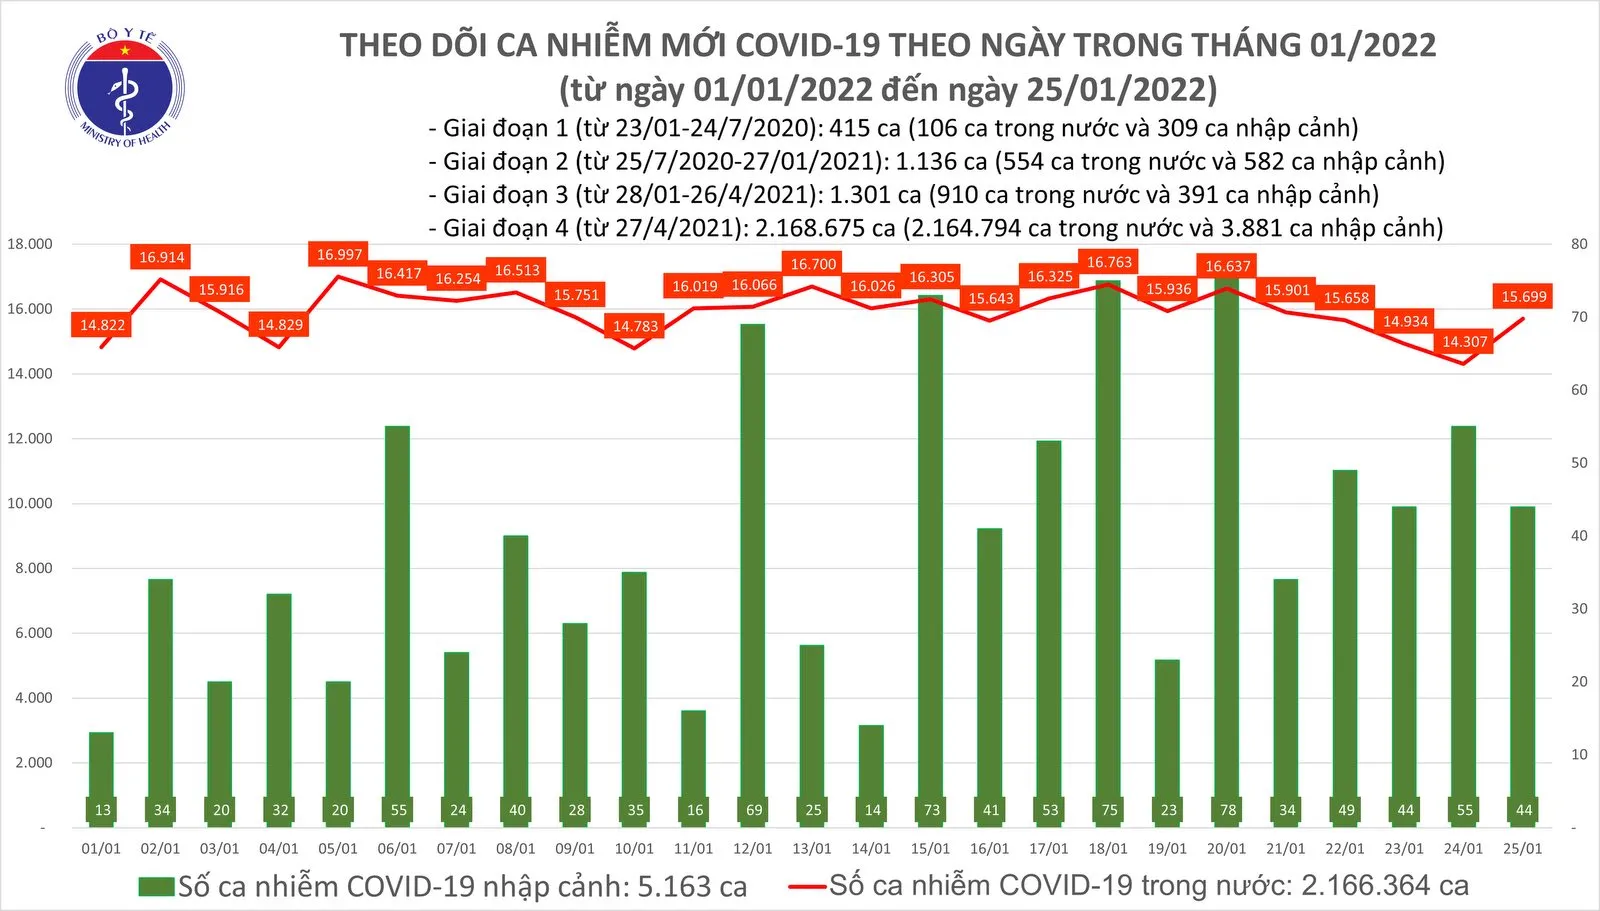 ngay-25-1-ca-nuoc-ghi-nhan-15-743-ca-mac-moi-covid-19-tphcm-chi-con-99-ca-voh.com.vn-anh1